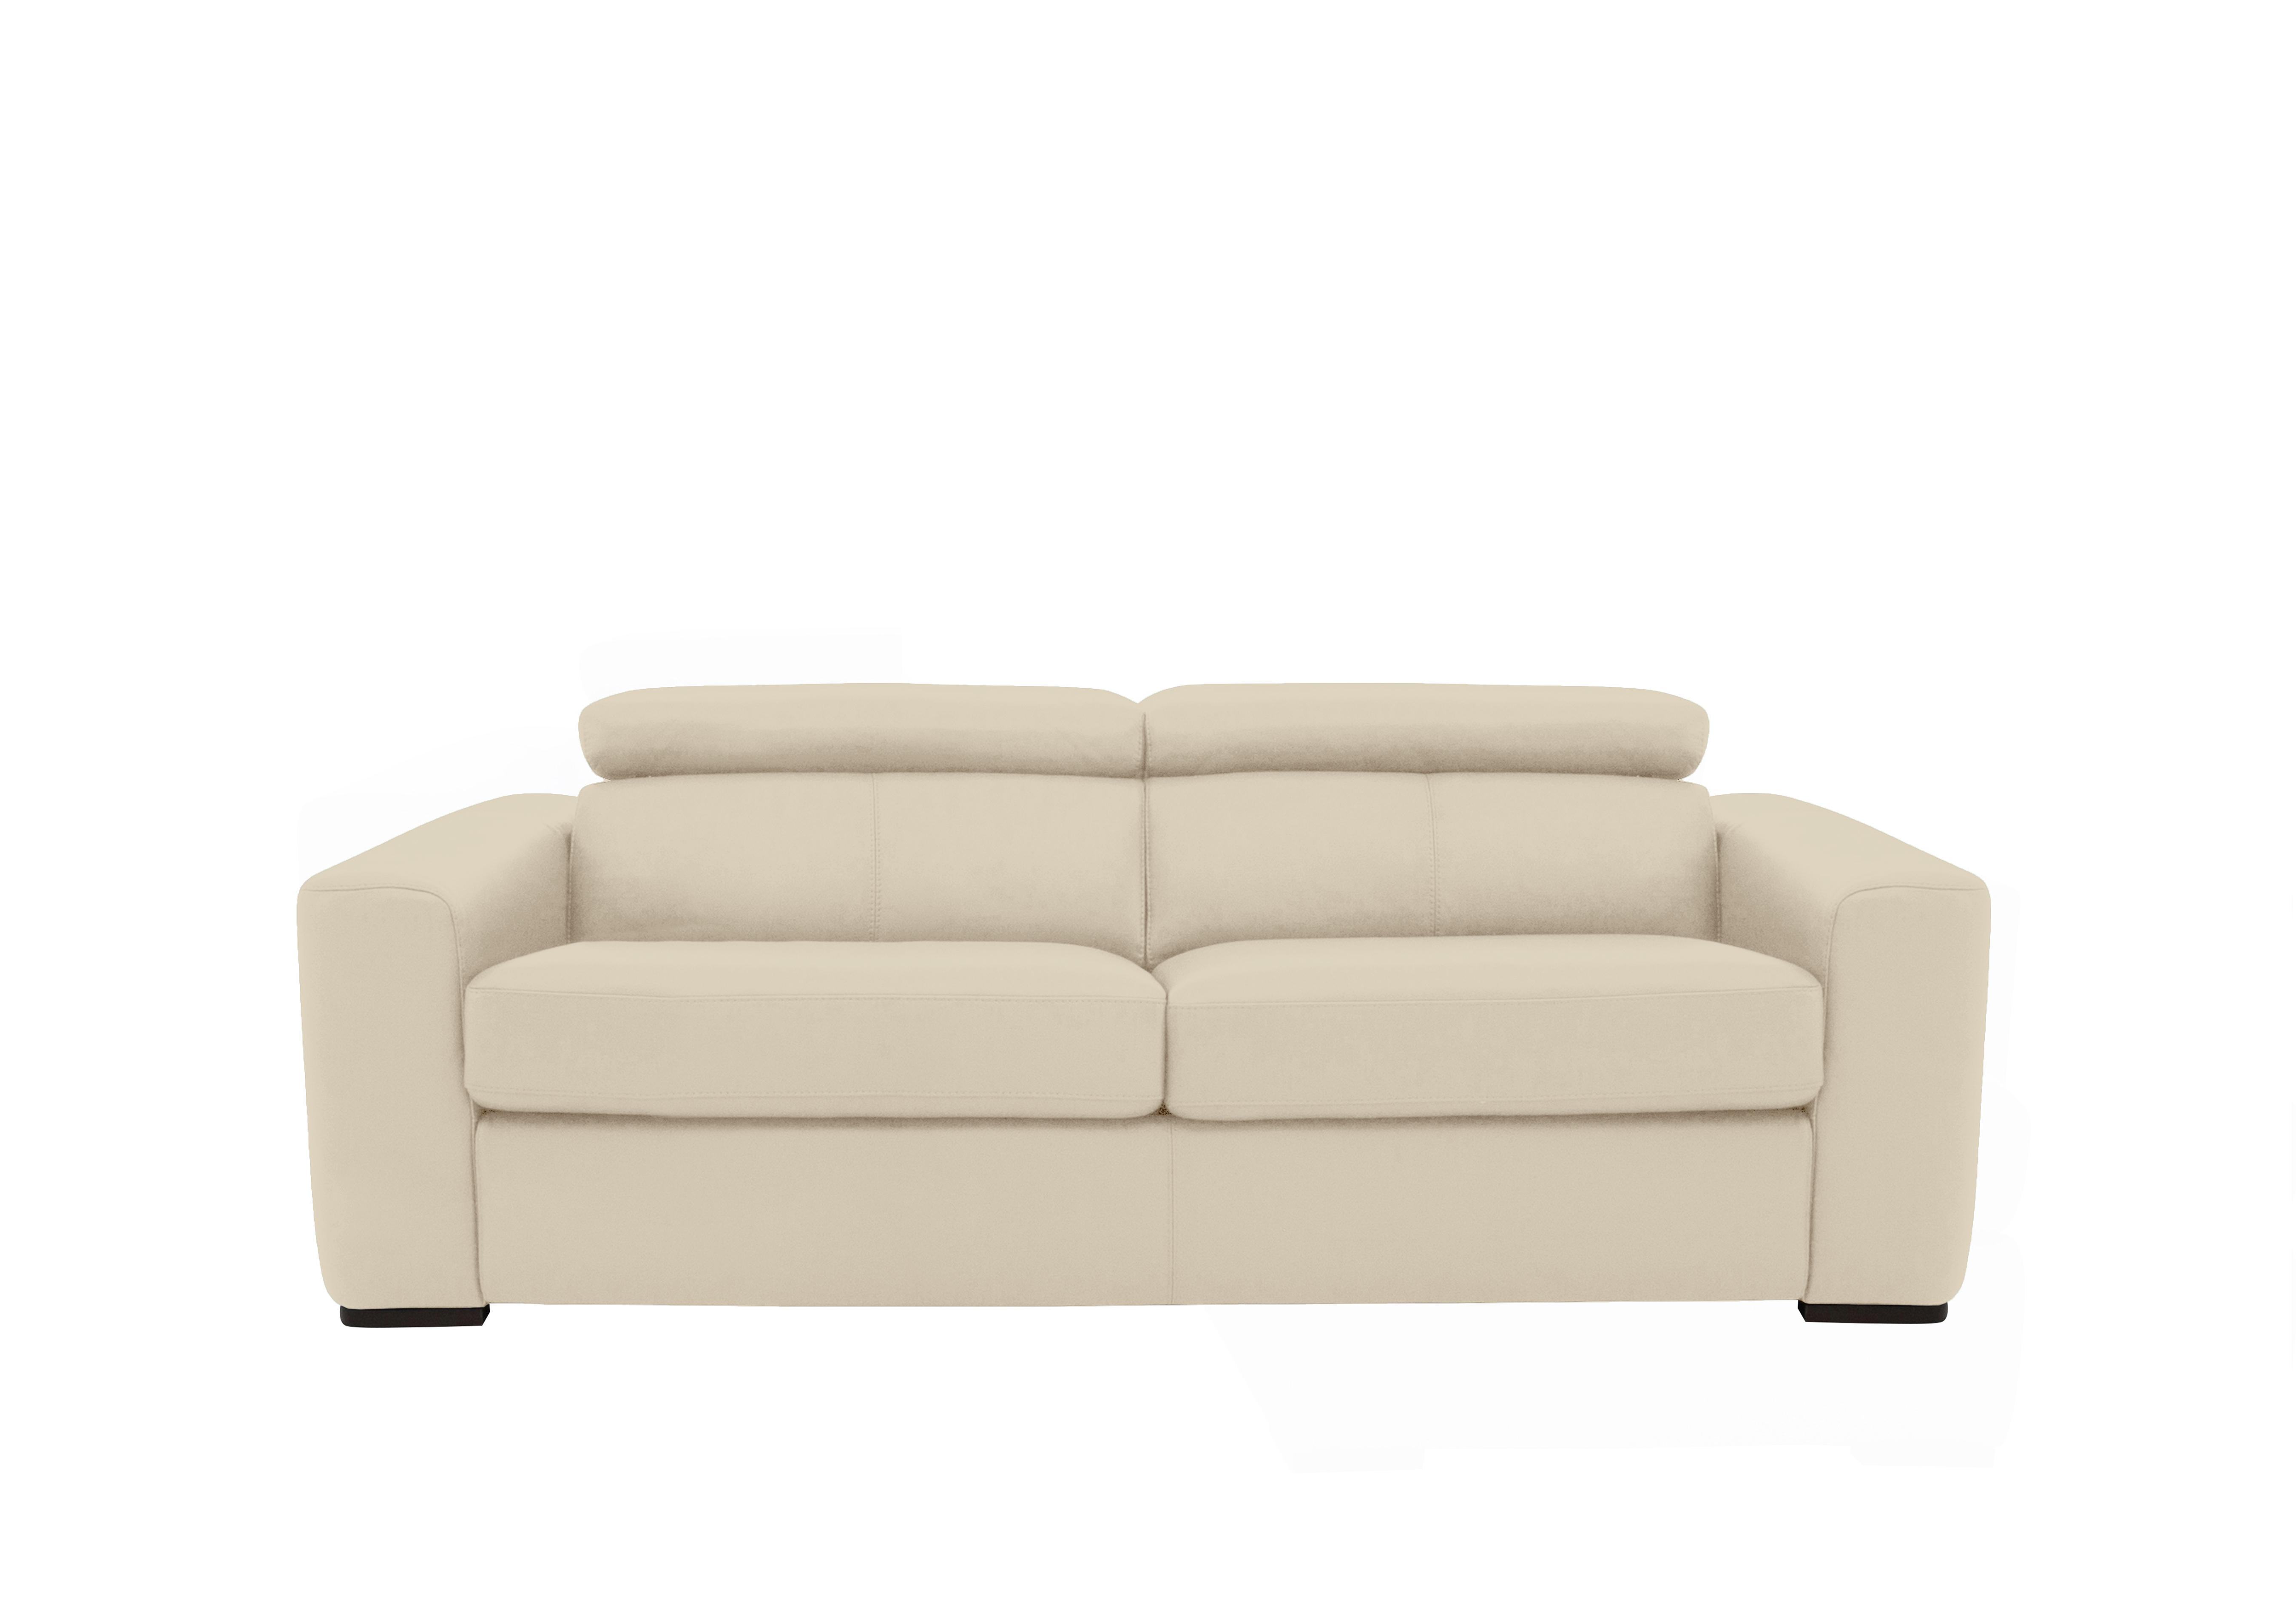 Infinity 3 Seater Leather Sofa Bed in Bv-862c Bisque on Furniture Village